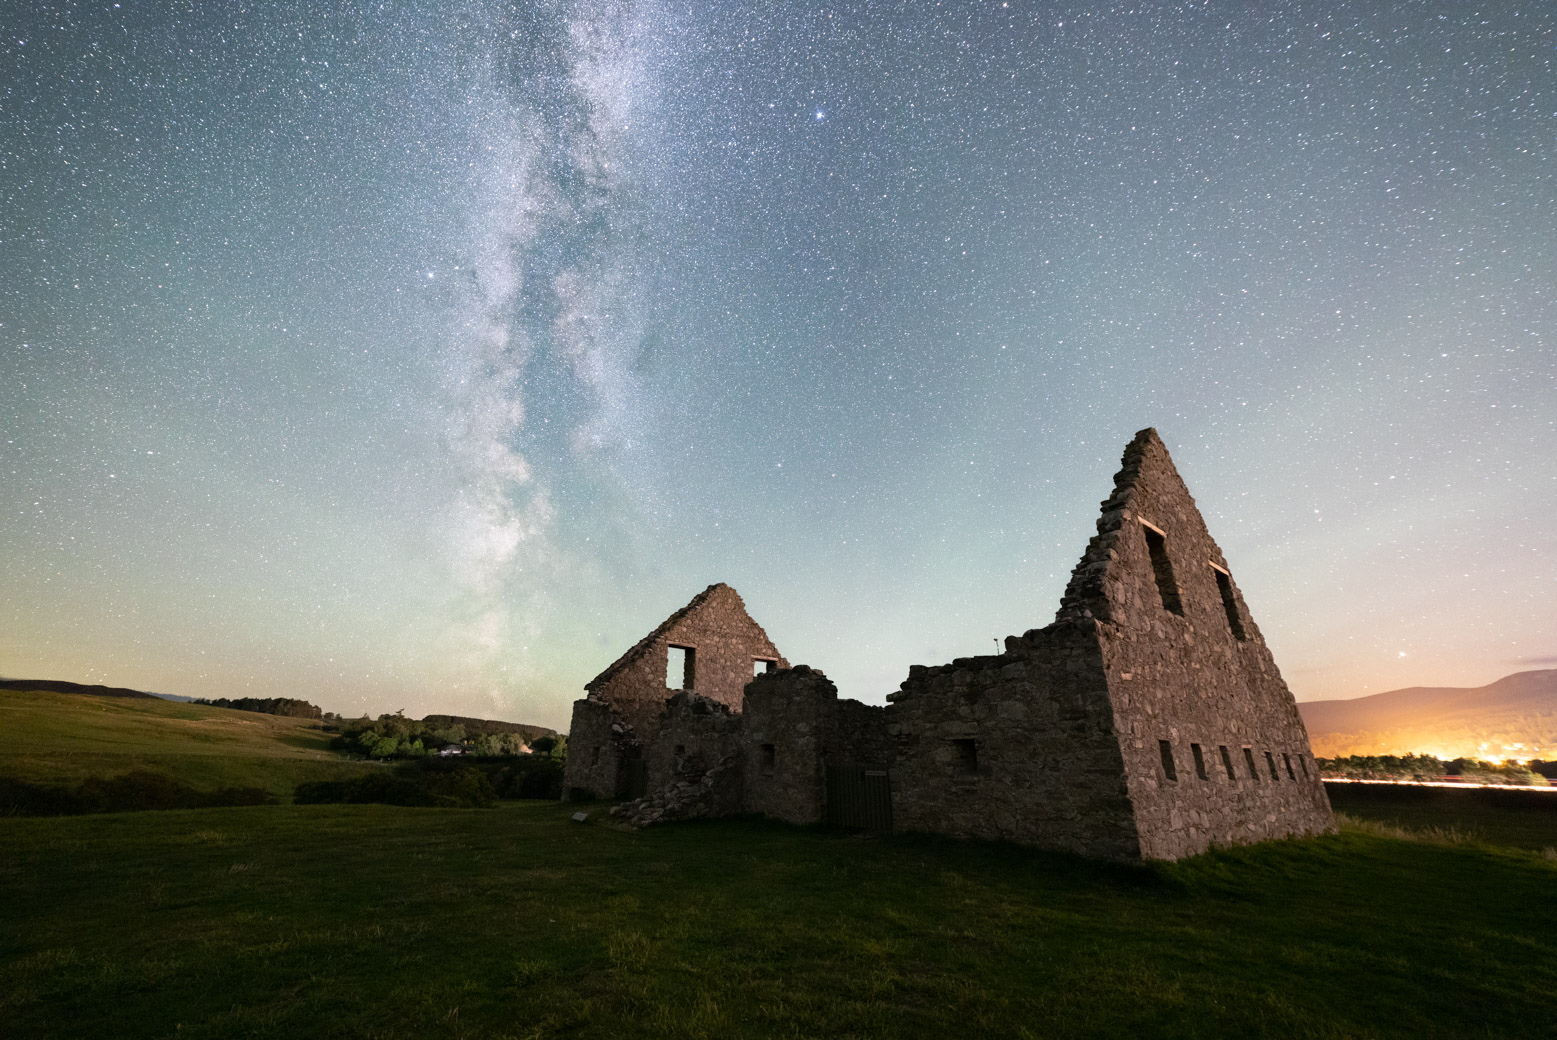 A wide angle view of the ruined stables at Ruthven Barracks, with the Milky Way in the background, August 2022. One of the many photos from that night.